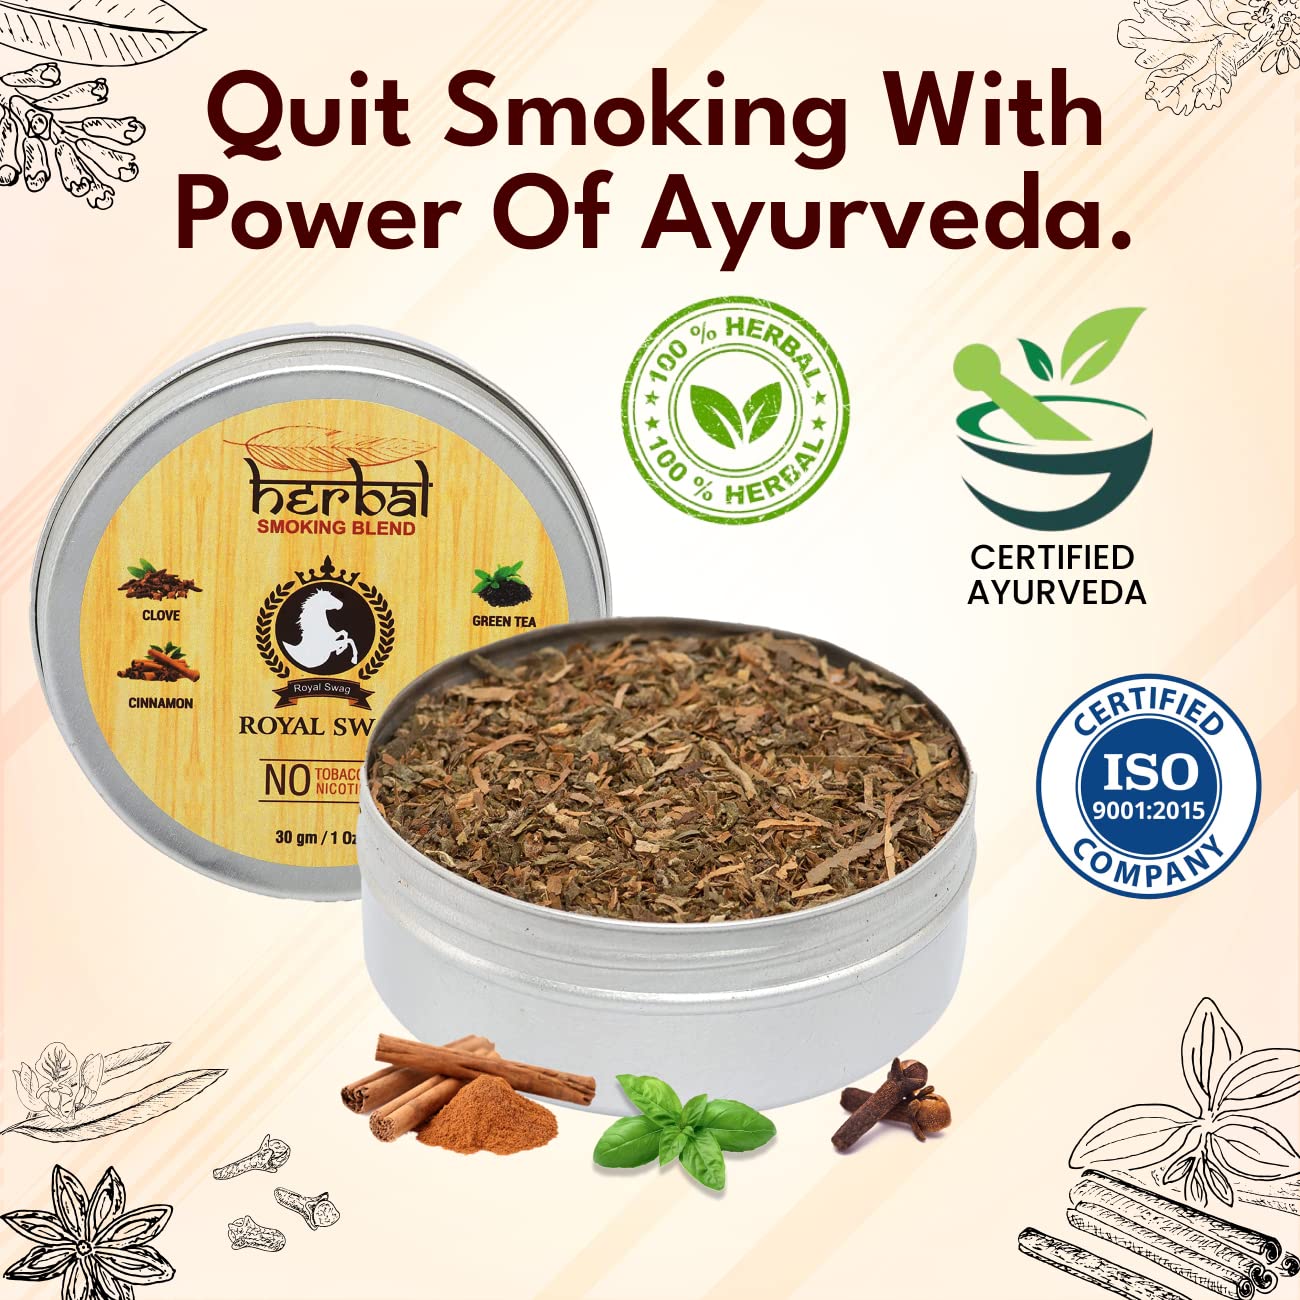 100% Tobacco-Free & Nicotine-Free Smoking Mixture With 100% Natural & Ayurvedic Herbal Smoking Blend 1 Pack (1 oz/ 30g Can) With Wooden Steel Pipe | Helps To Quit Smoking(Smoking Cessation)